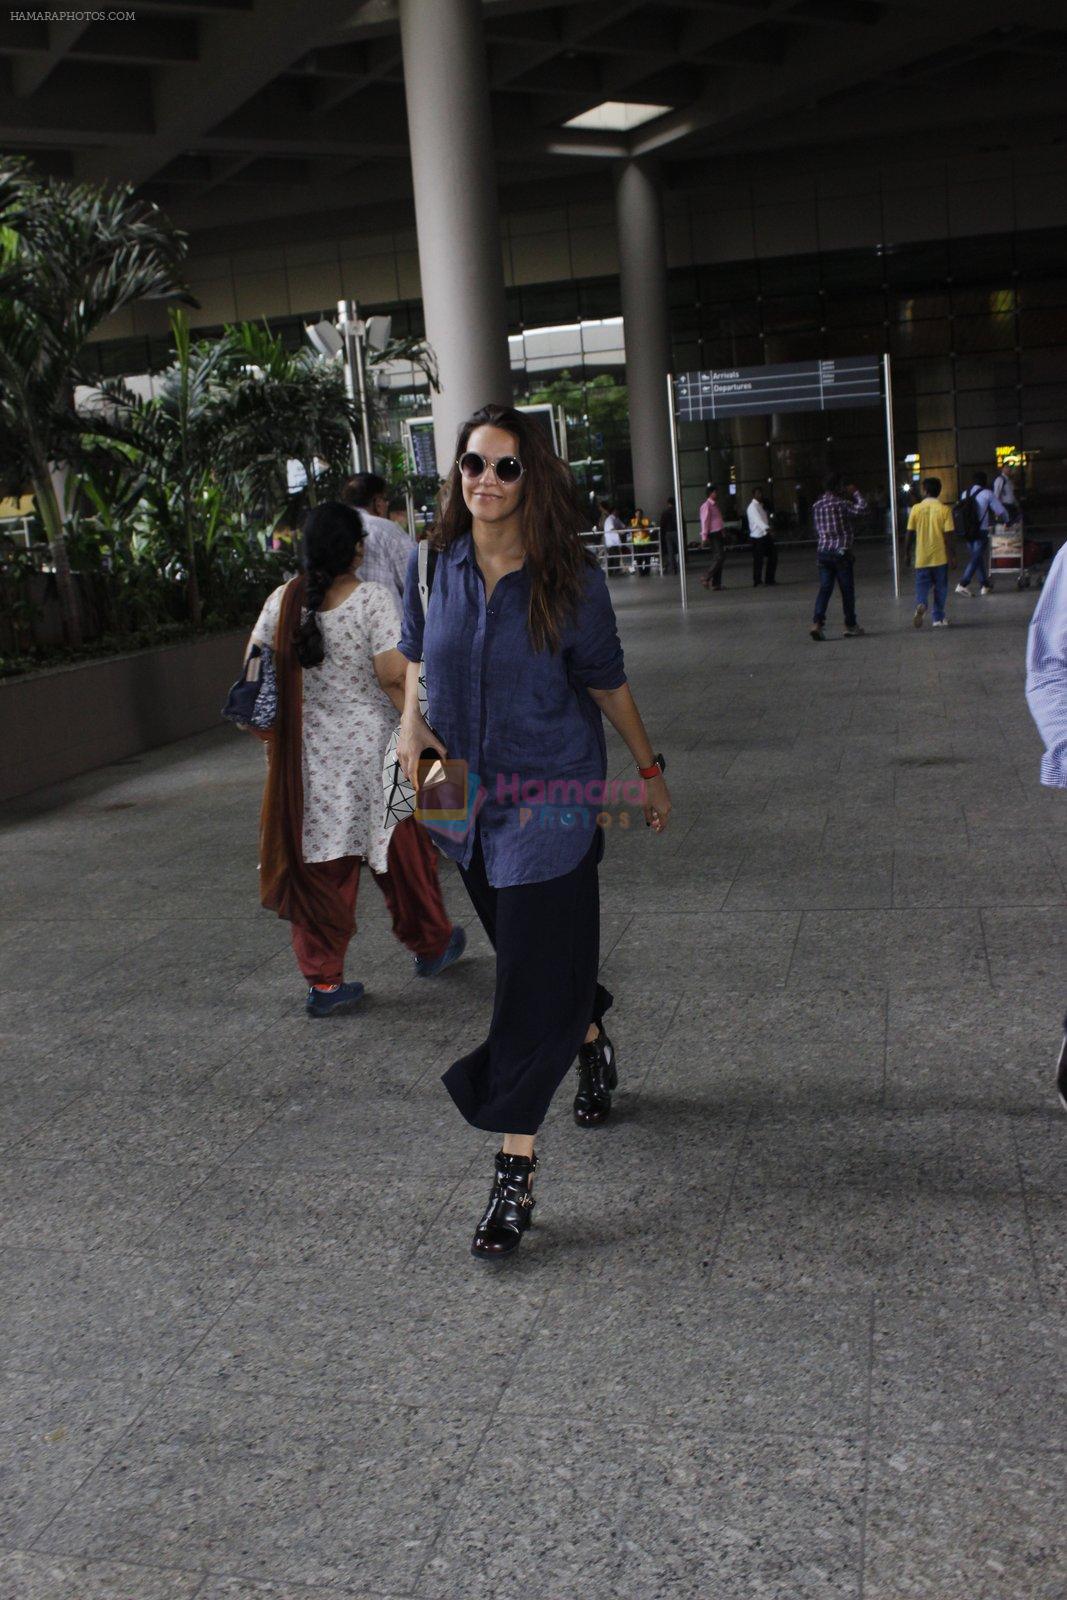 Neha Dhupia snapped at airport on 18th July 2016